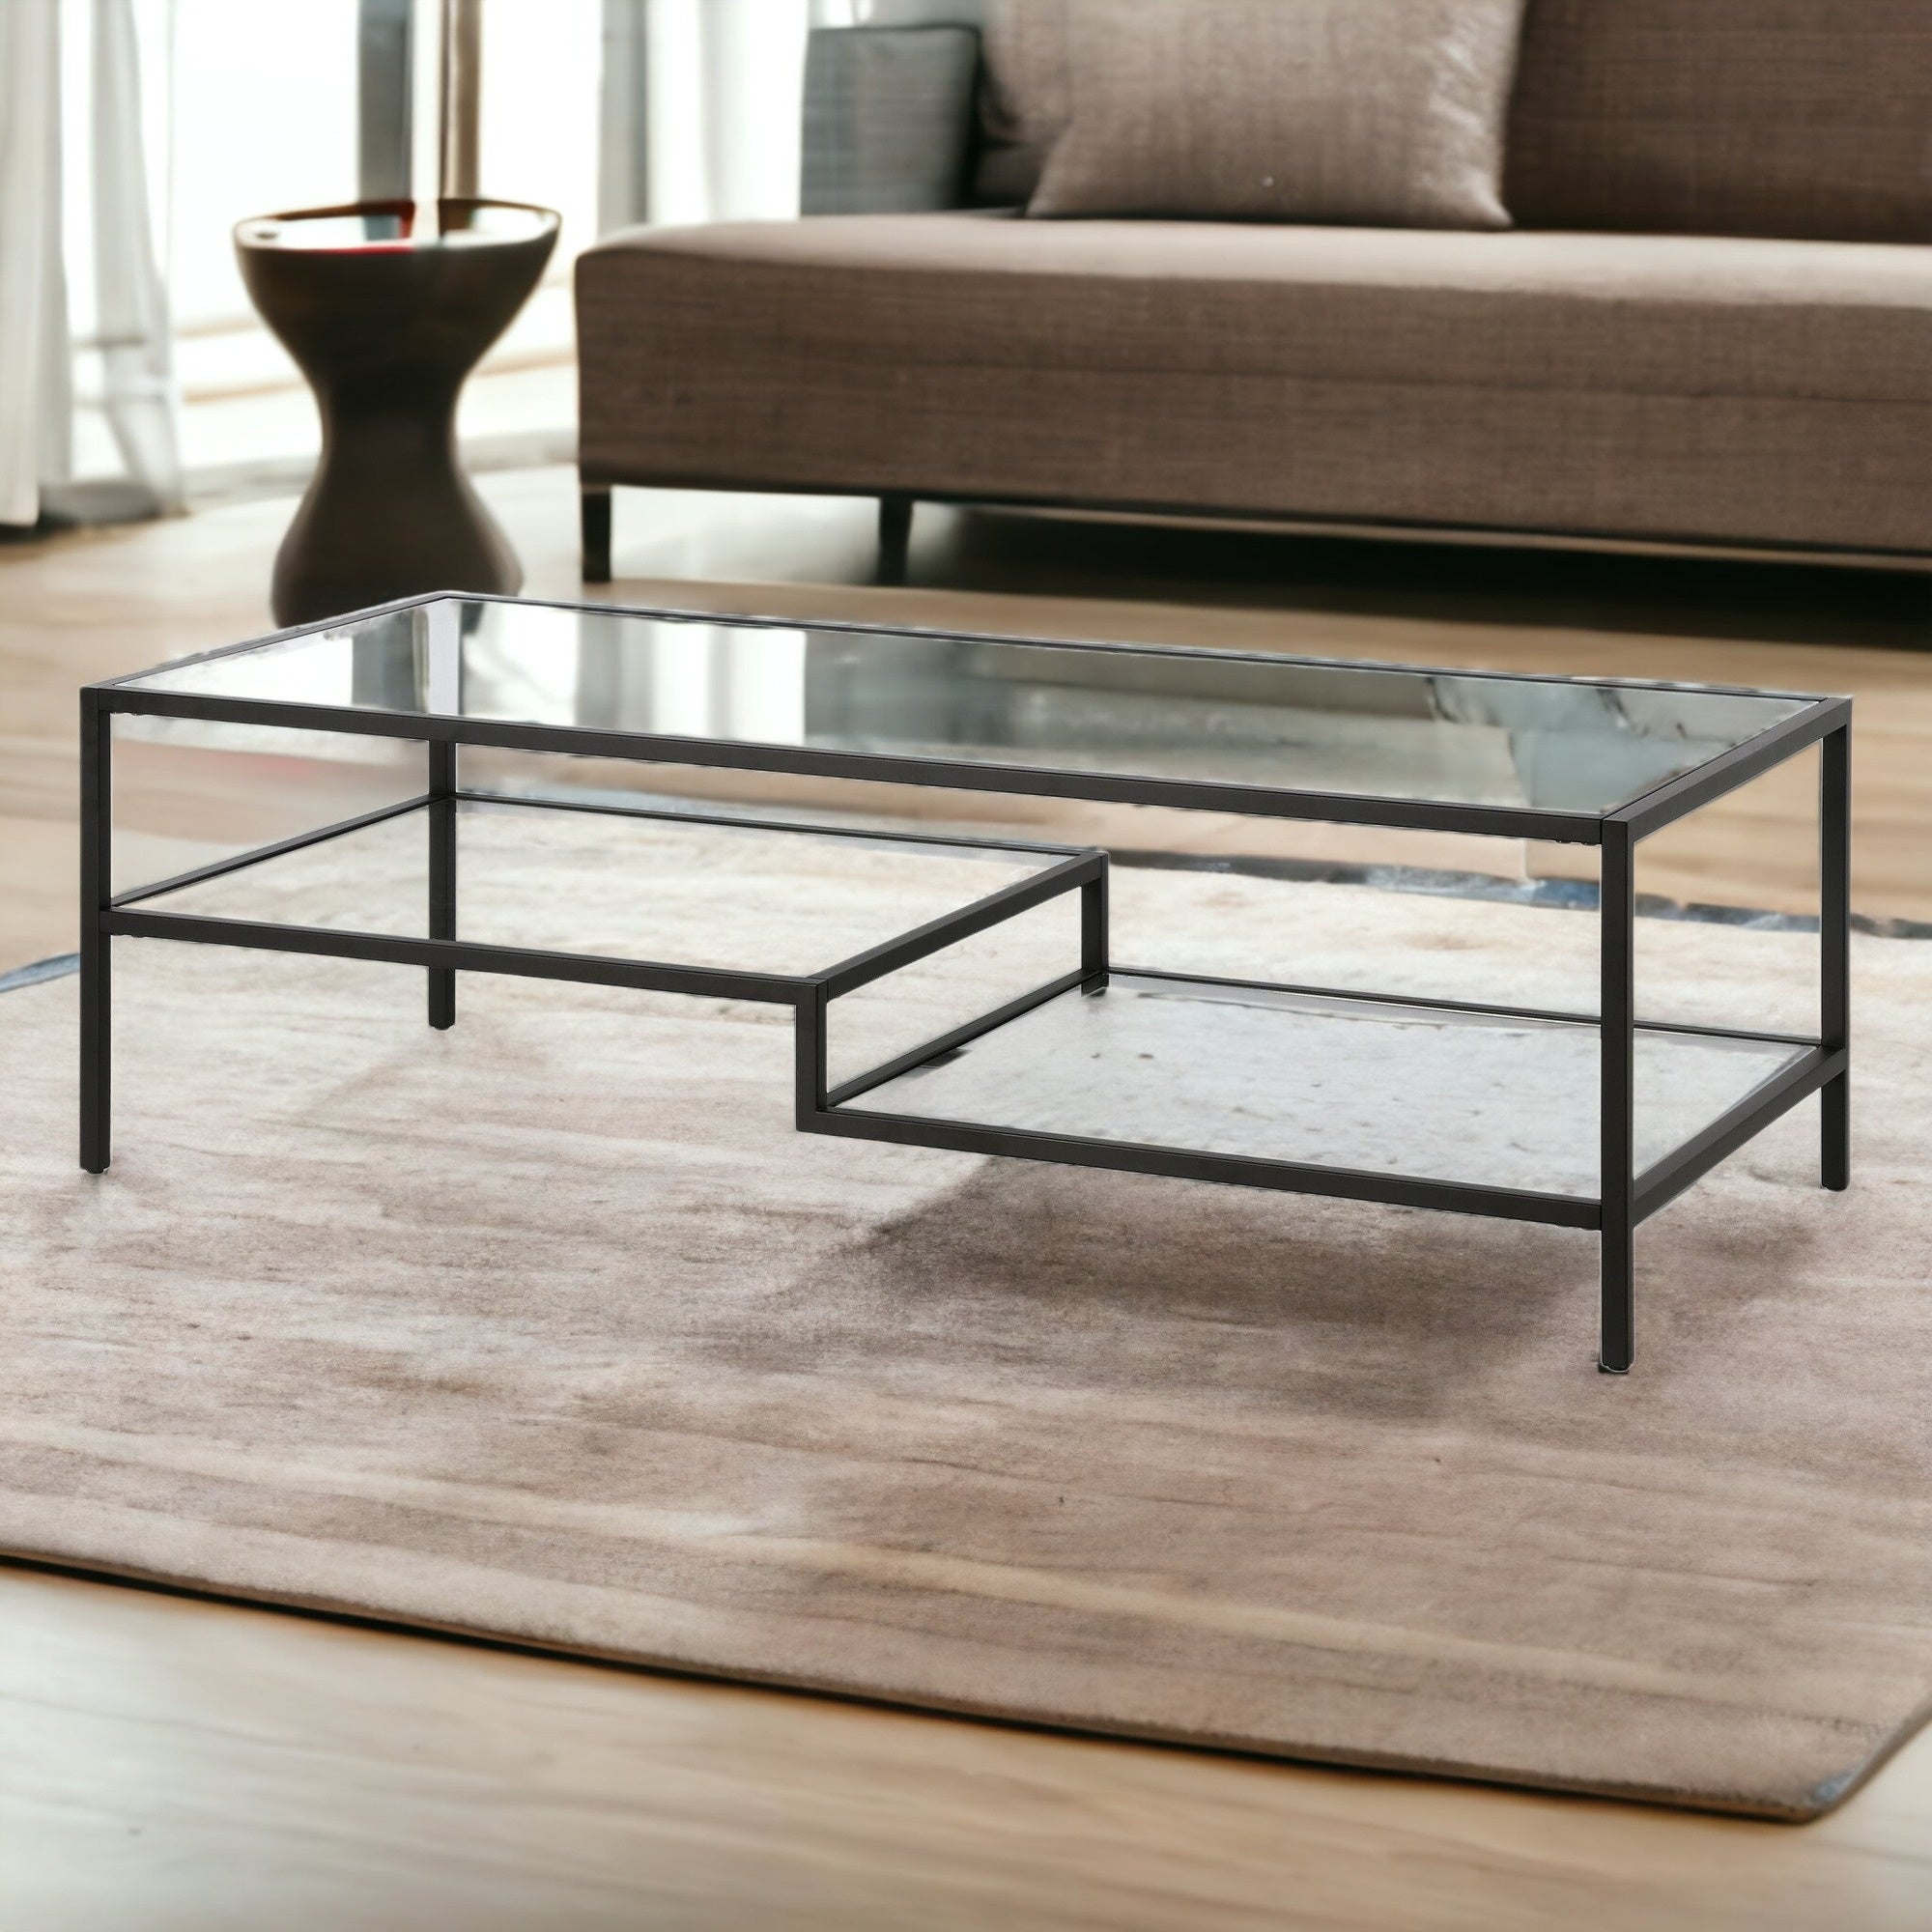 54" Black Glass And Steel Coffee Table With Two Shelves